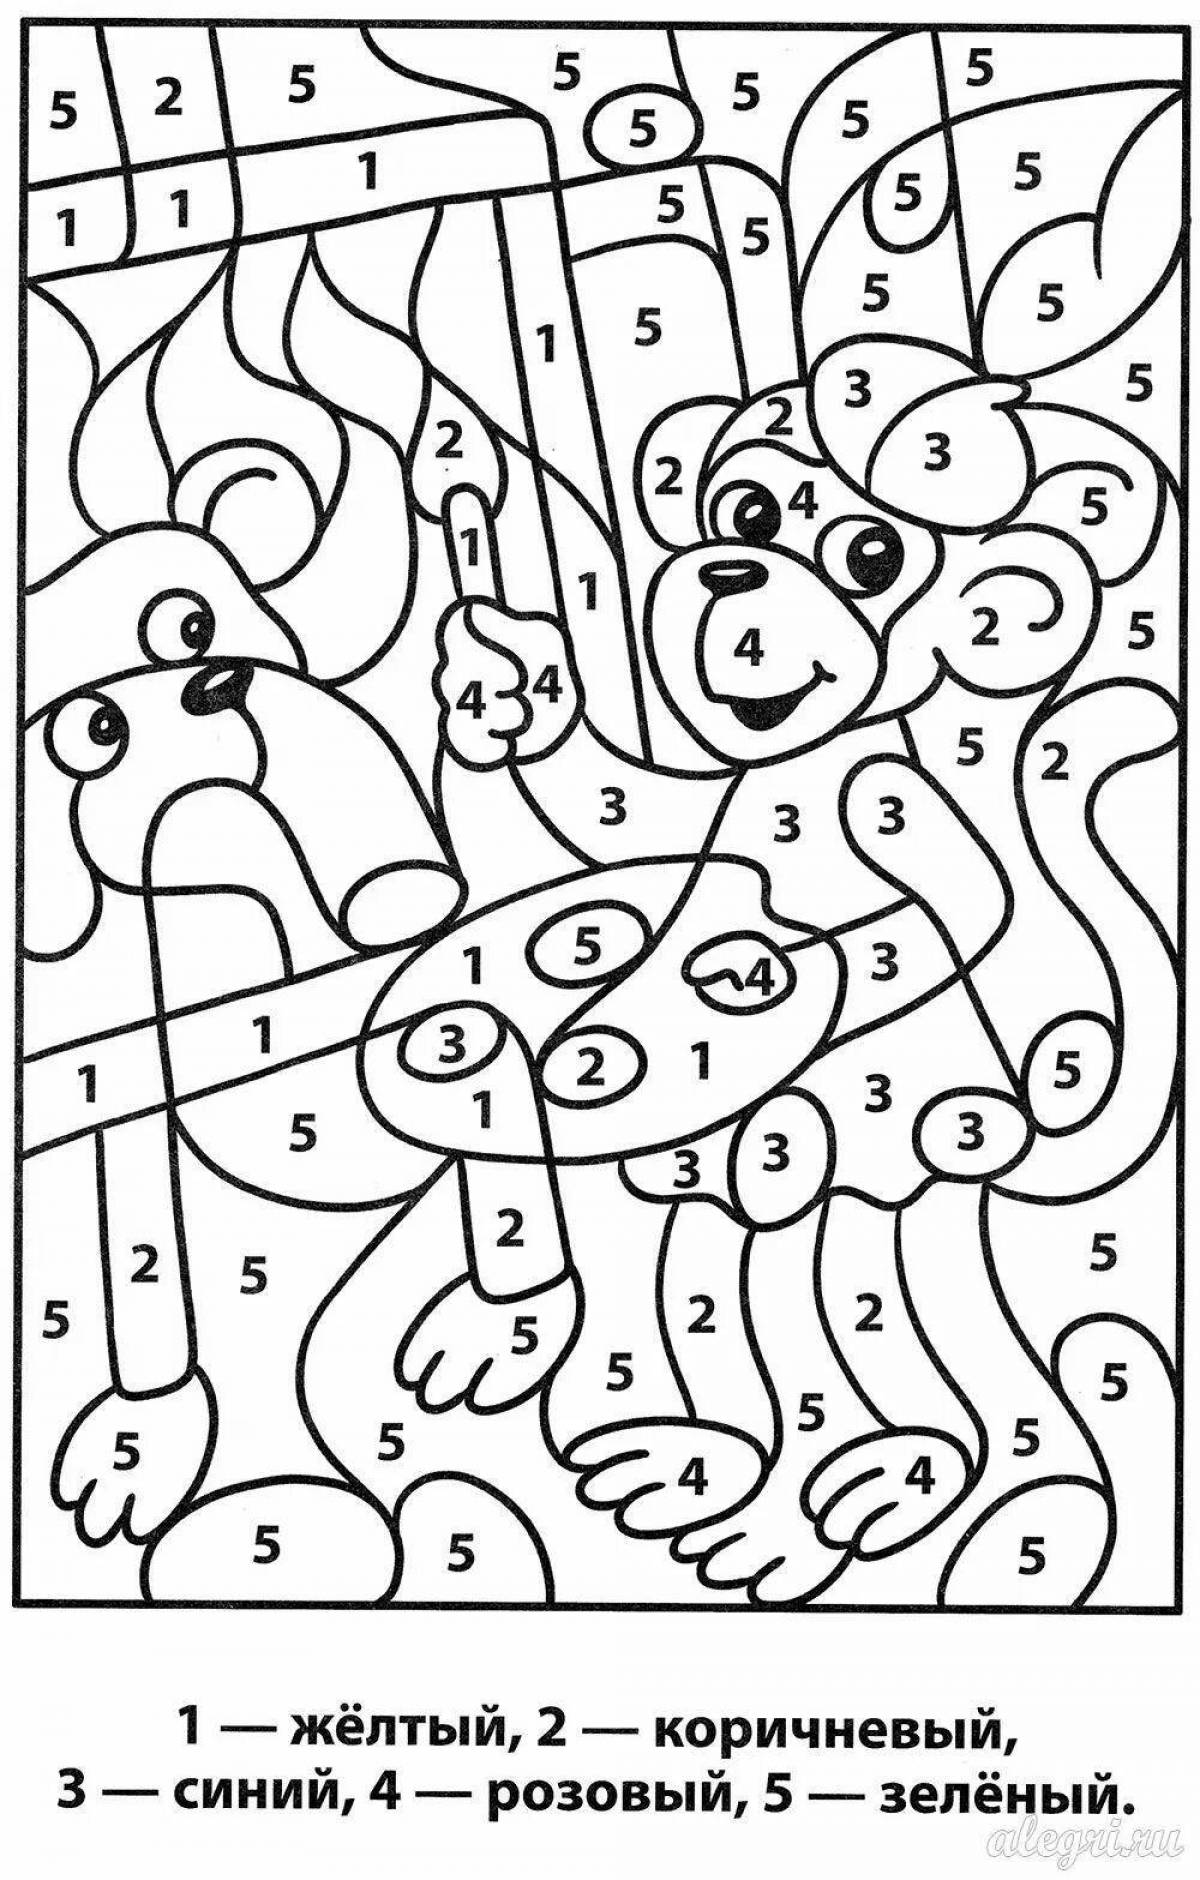 Stimulating coloring by numbers for kids 6 7